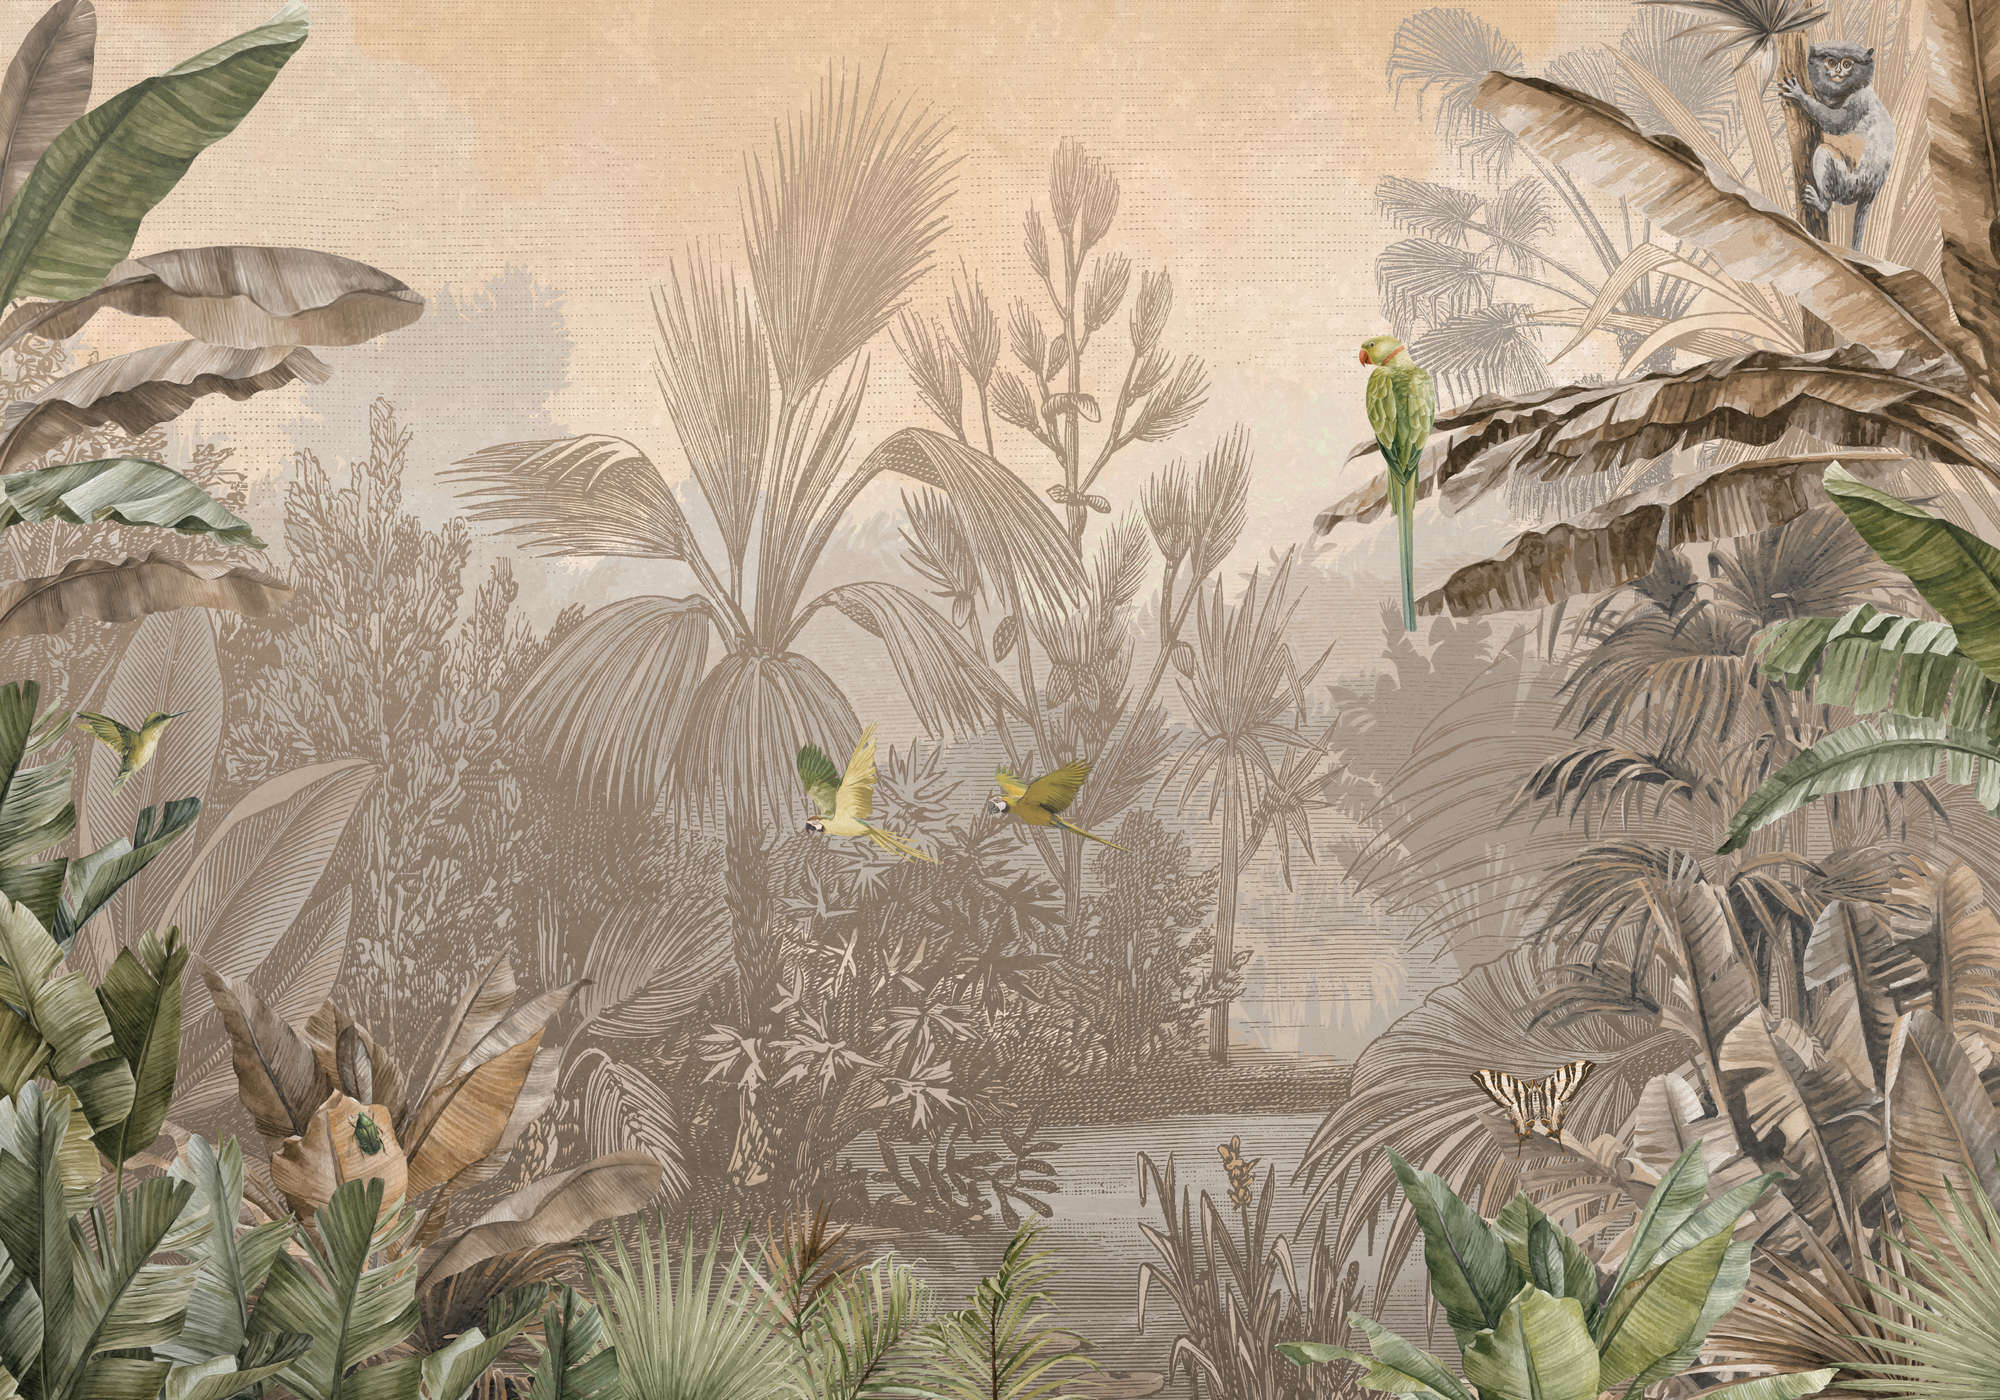             Jungle mural brown-green in drawing style
        